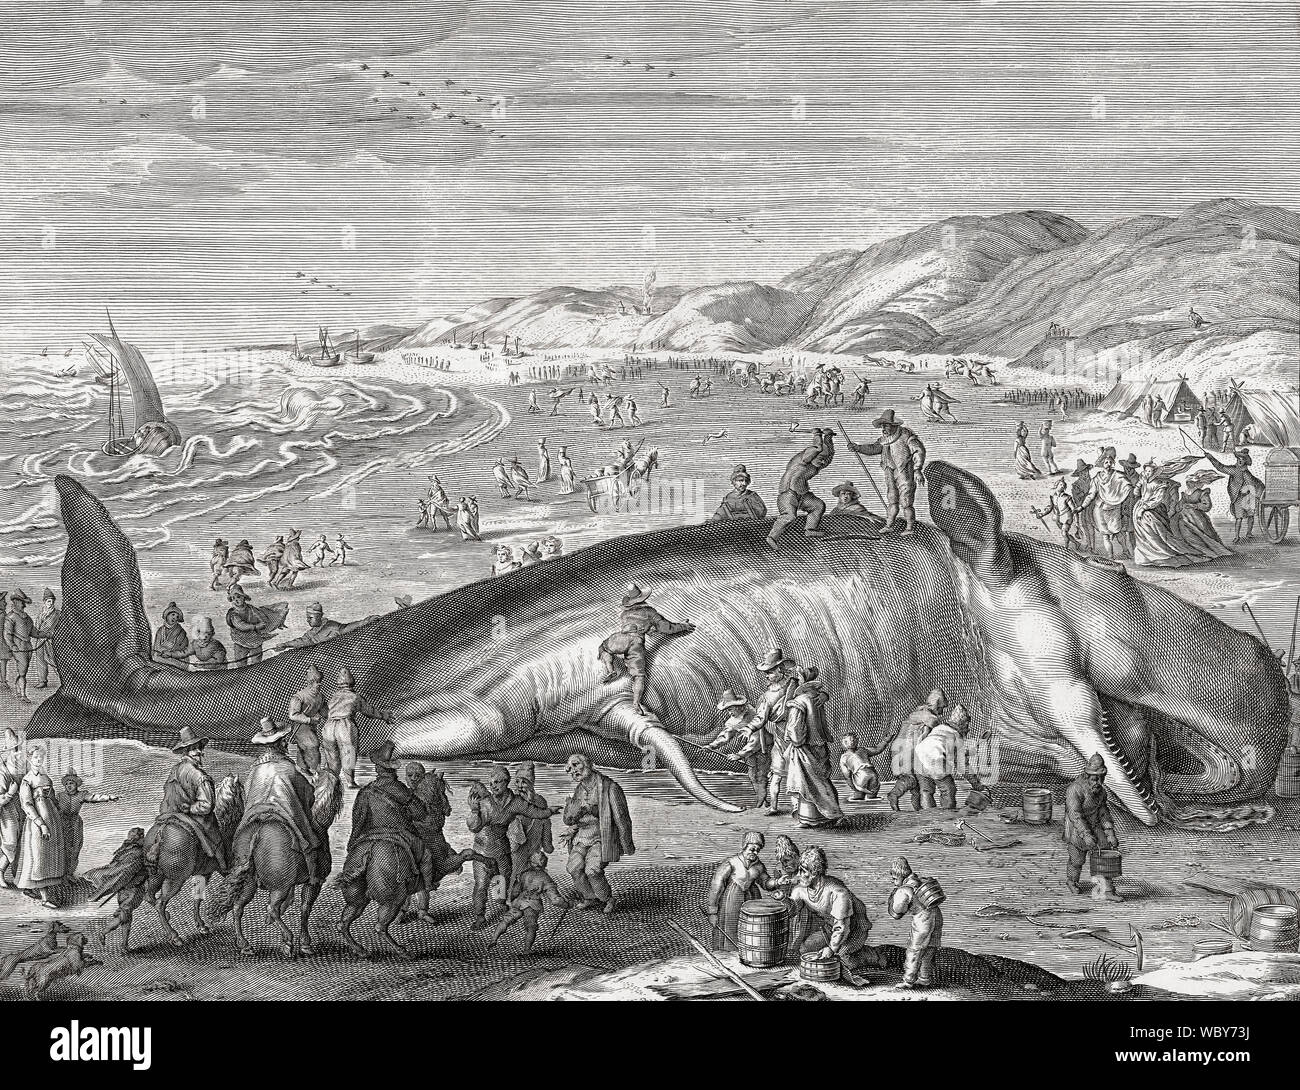 Sperm whale stranded on Dutch beach in 1598.  It attracted many visitors including the artist Henrik Goltzius.  This illustration was made by Jacob Mathan after Goltzius's work Stock Photo